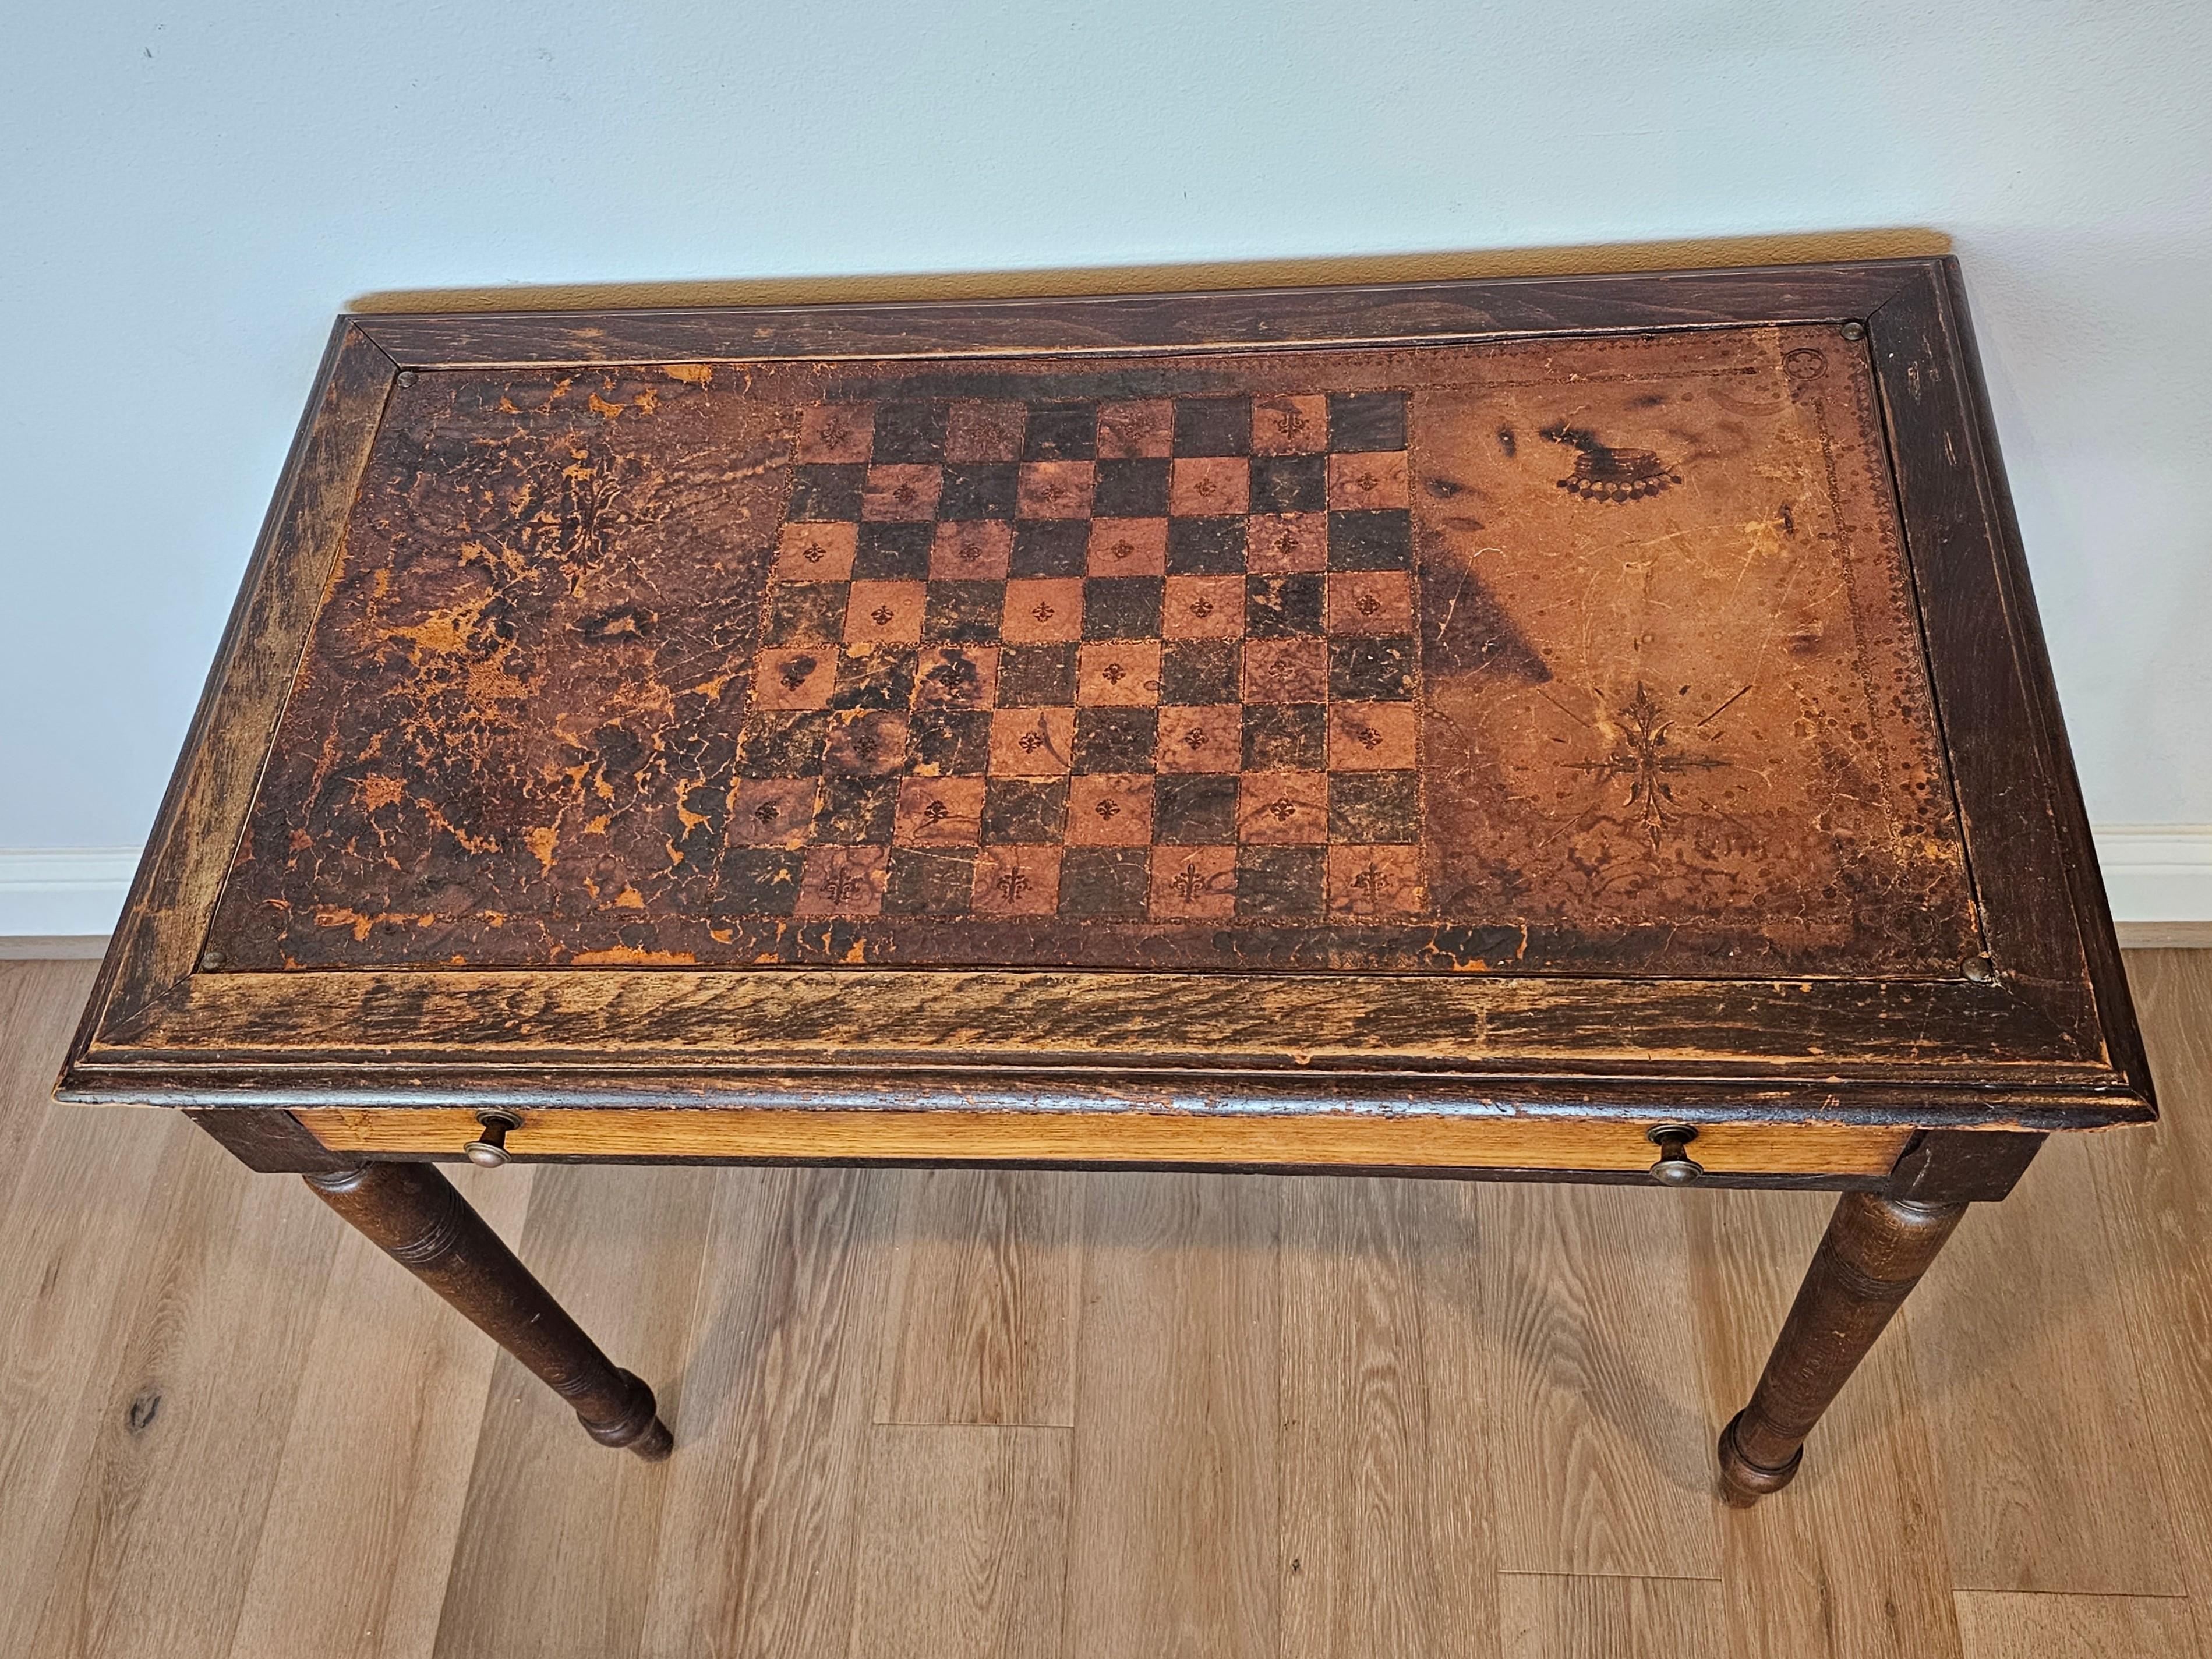 Antique Continental European Embossed Leather Games Table  In Distressed Condition For Sale In Forney, TX